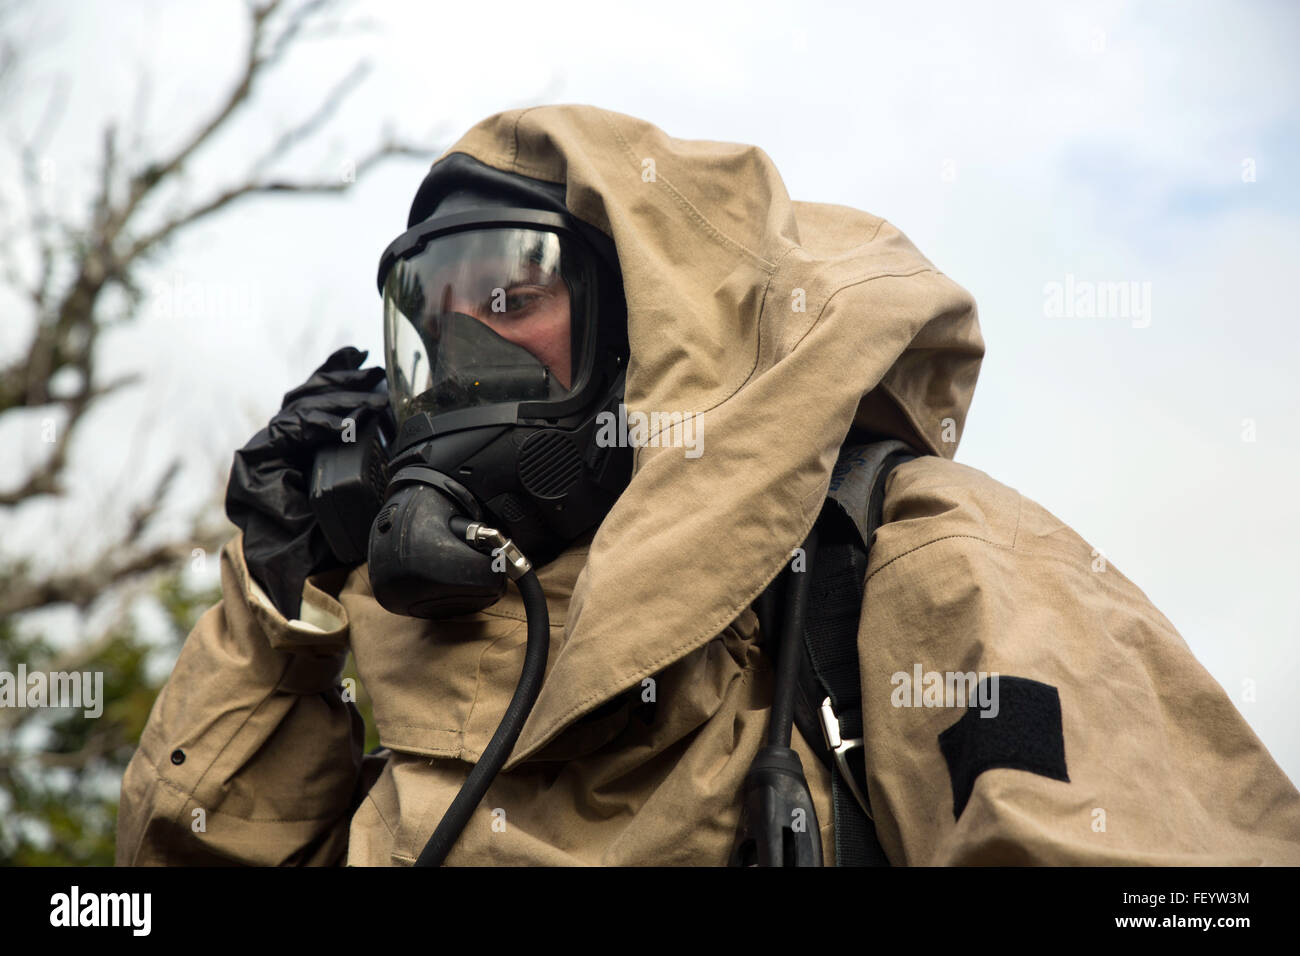 Lance Cpl. Ryan Yancey, from Emory, Texas, radios his team during a joint-training-exercise between III Marine Expeditionary Forces Chemical, Biological, Radiological, Nuclear units and Explosive Ordnance Disposal units at the Central Training Area, Camp Hansen, Okinawa, Japan, Jan. 29, 2016. The exercise enhances unit cohesion between the two units for further training, real-world instances and to keep the Asia-Pacific region safe from explosive ordnances and CBRN threats. Yancey is a CBRN defense specialist with 1st Marine Aircraft Wing, III MEF. Stock Photo